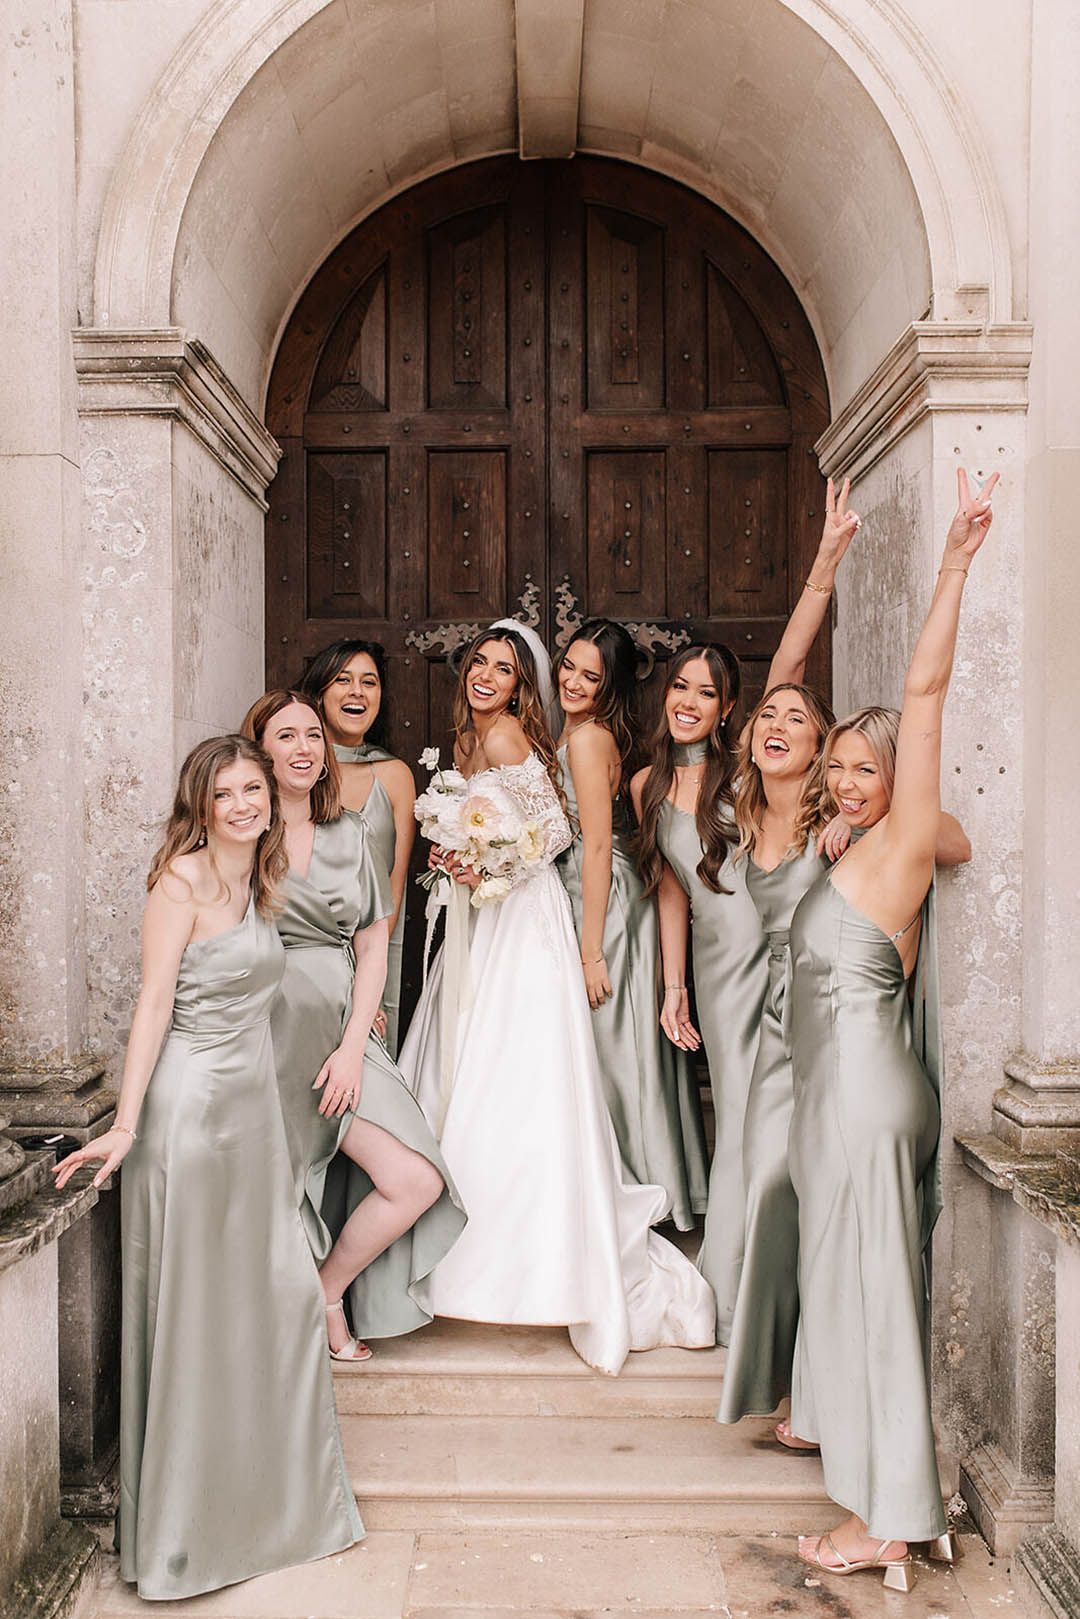 Rewritten Bridesmaid Dresses  A Day In The Life - Rock My Wedding